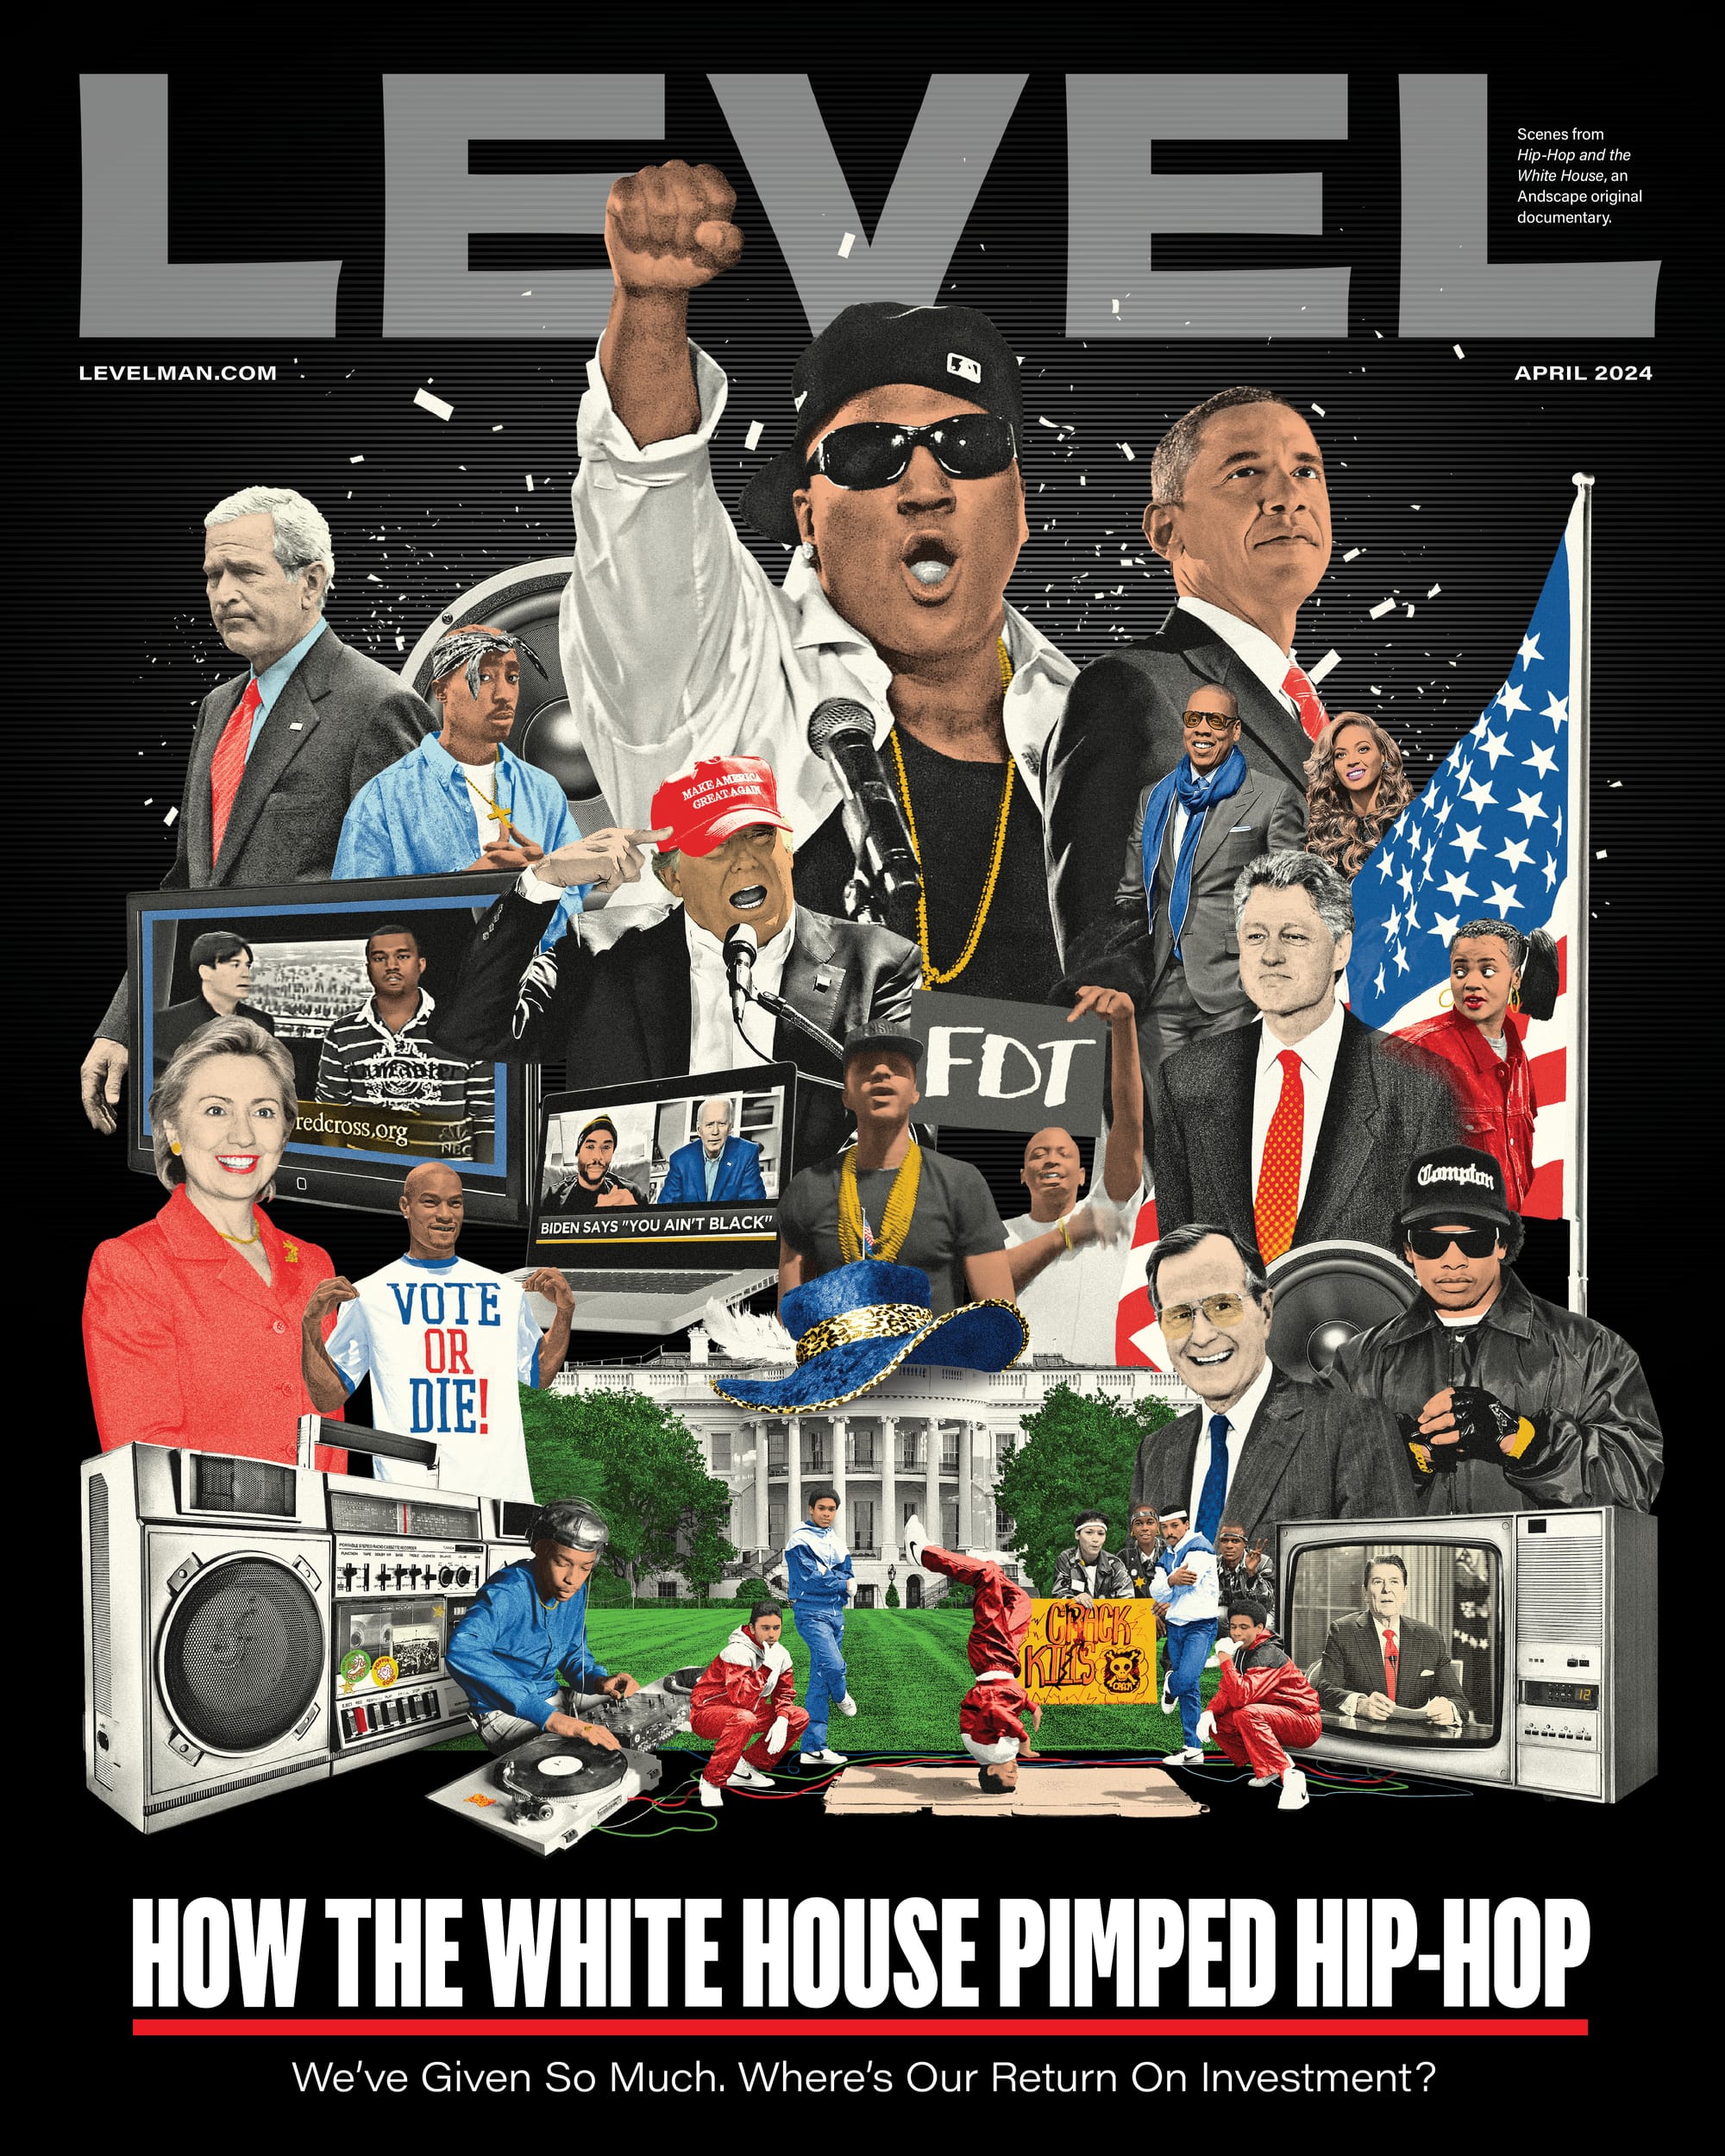 LEVEL's April 2024 cover highlights the connection between hip-hop and politics.